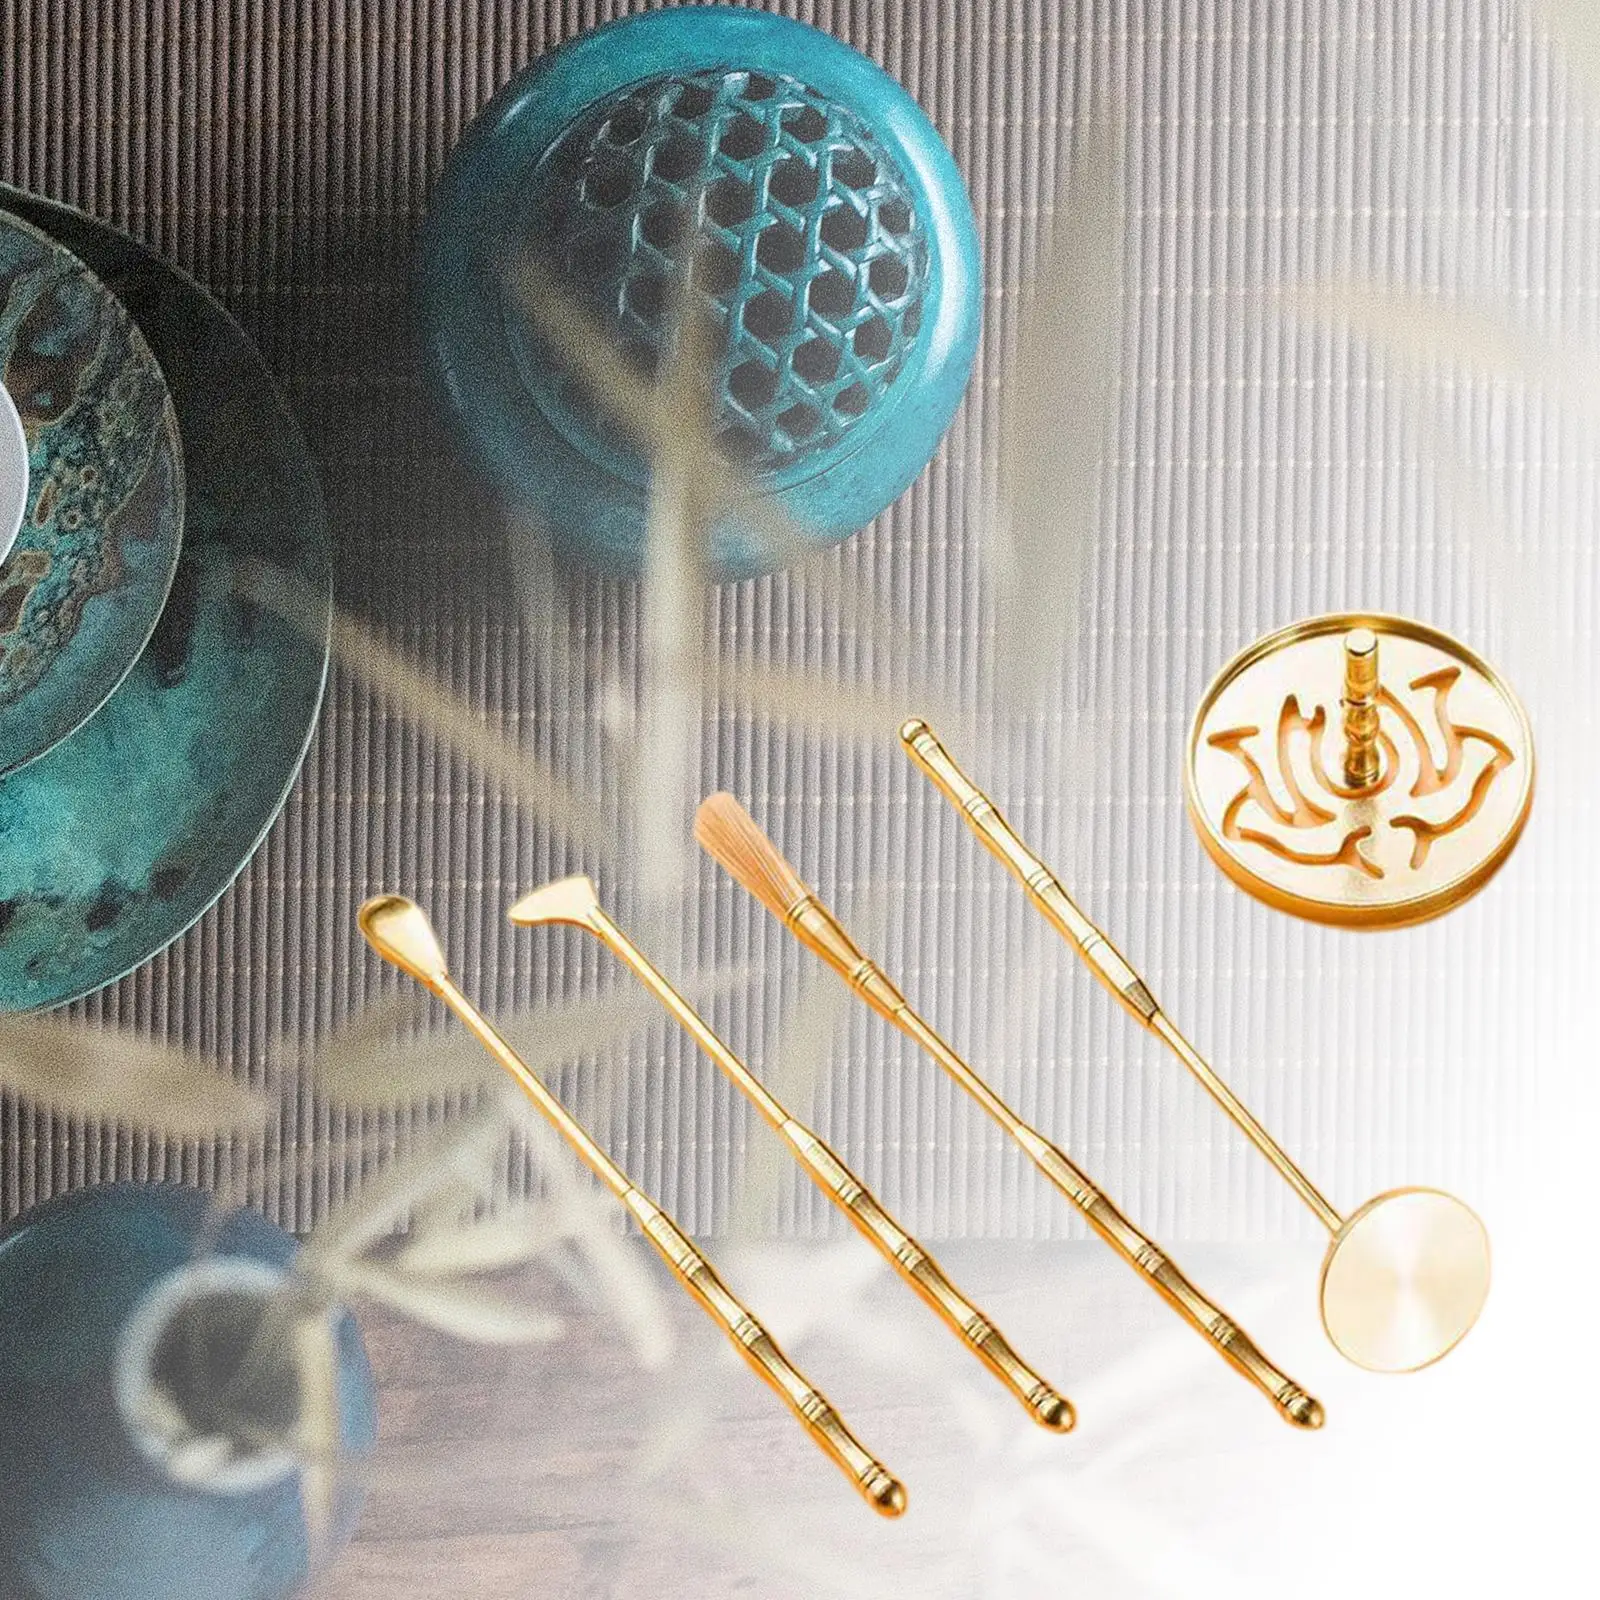 Incense Making Censer Tool Set Incense Brush Incense Spoon Introductory